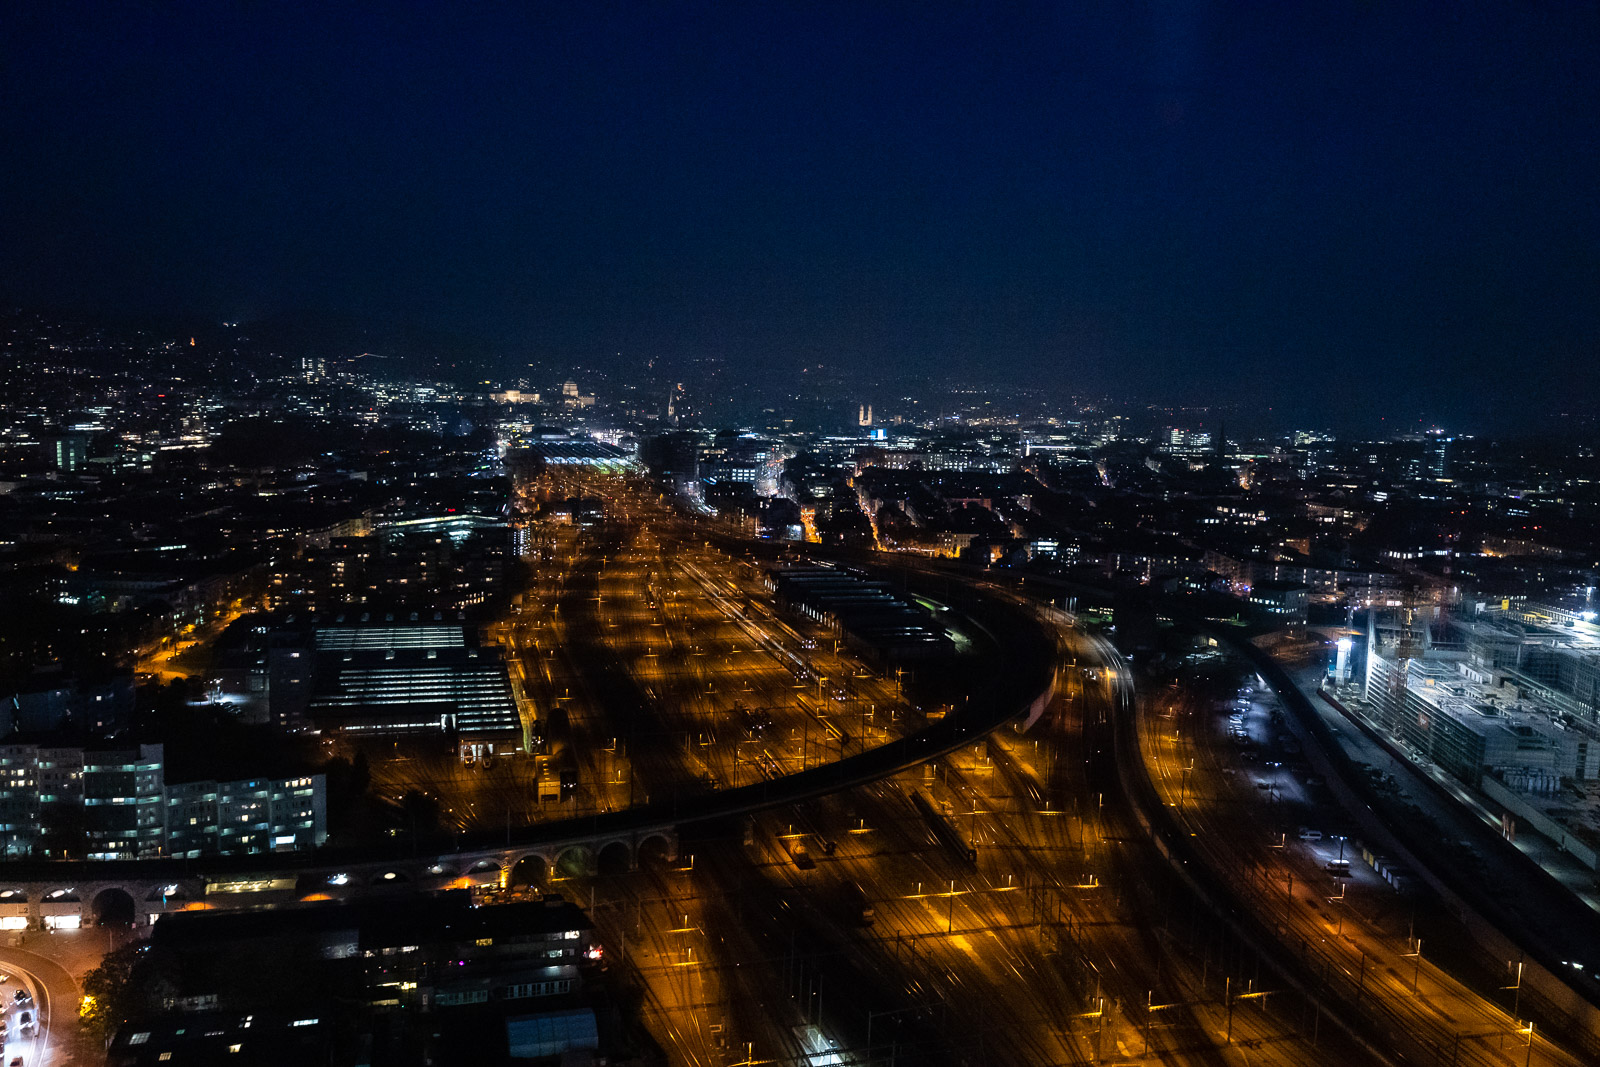 Zurich by Night - seen from Prime Tower Clouds restaurant and event location